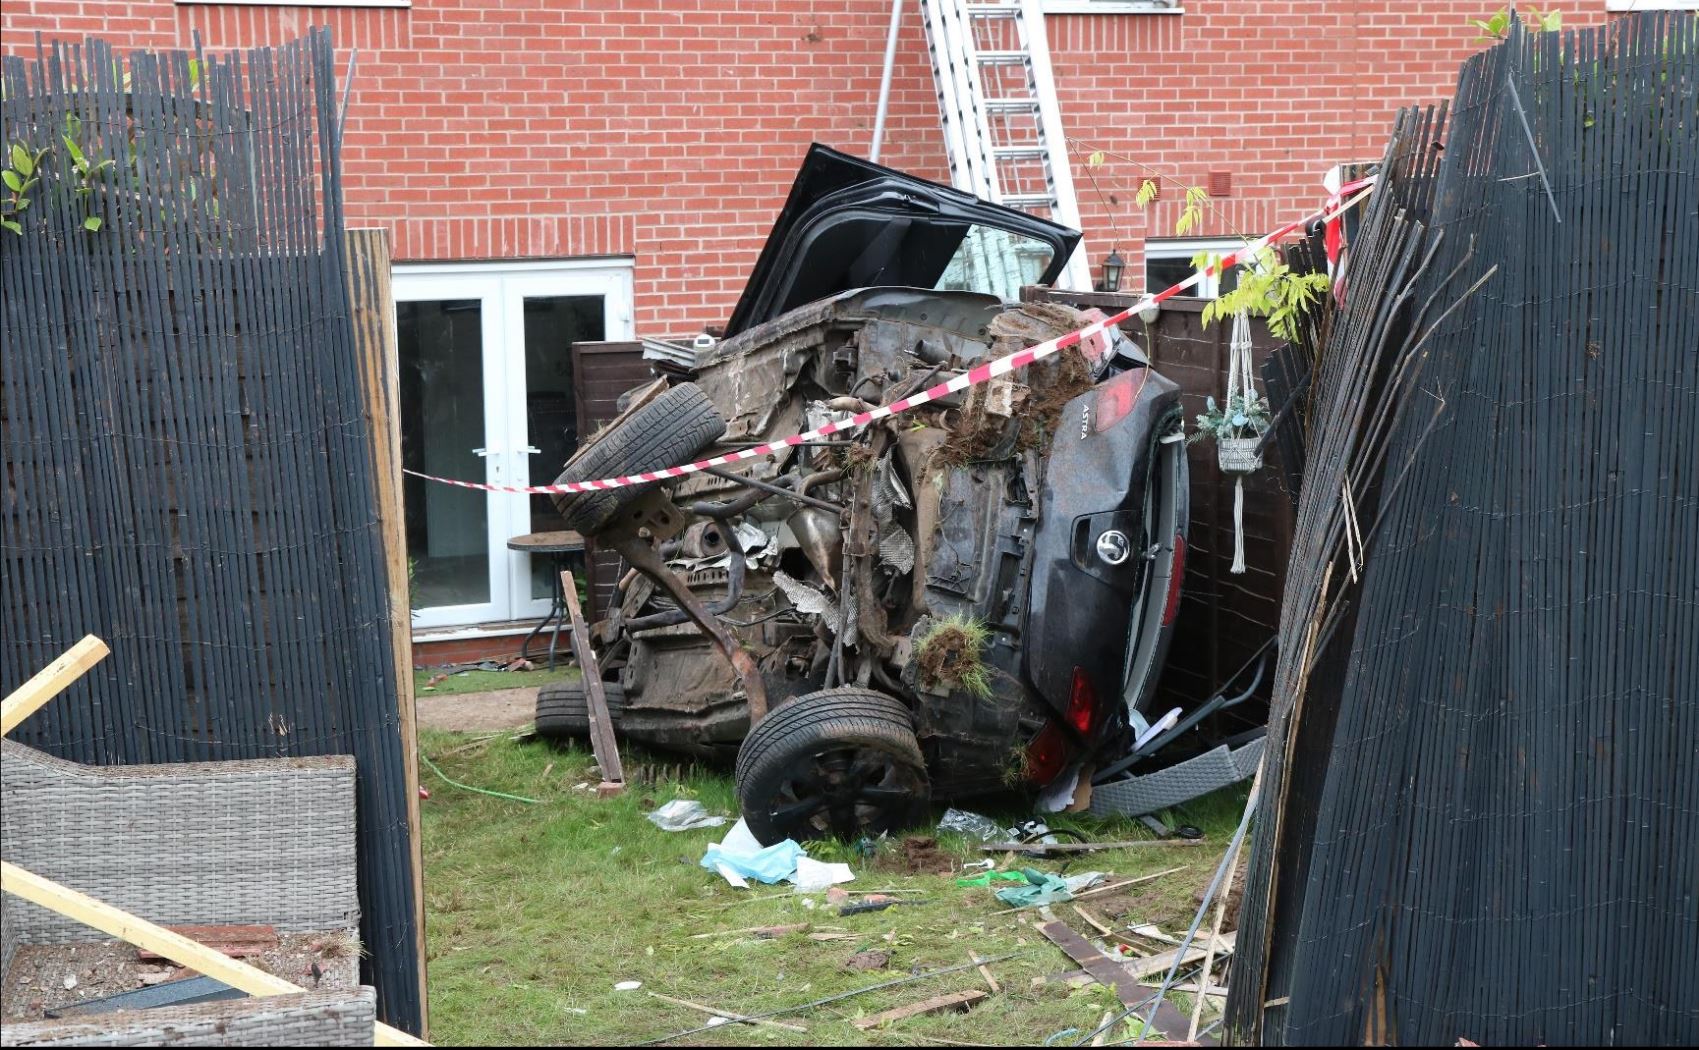 The car came to a stop on its side in a residential garden